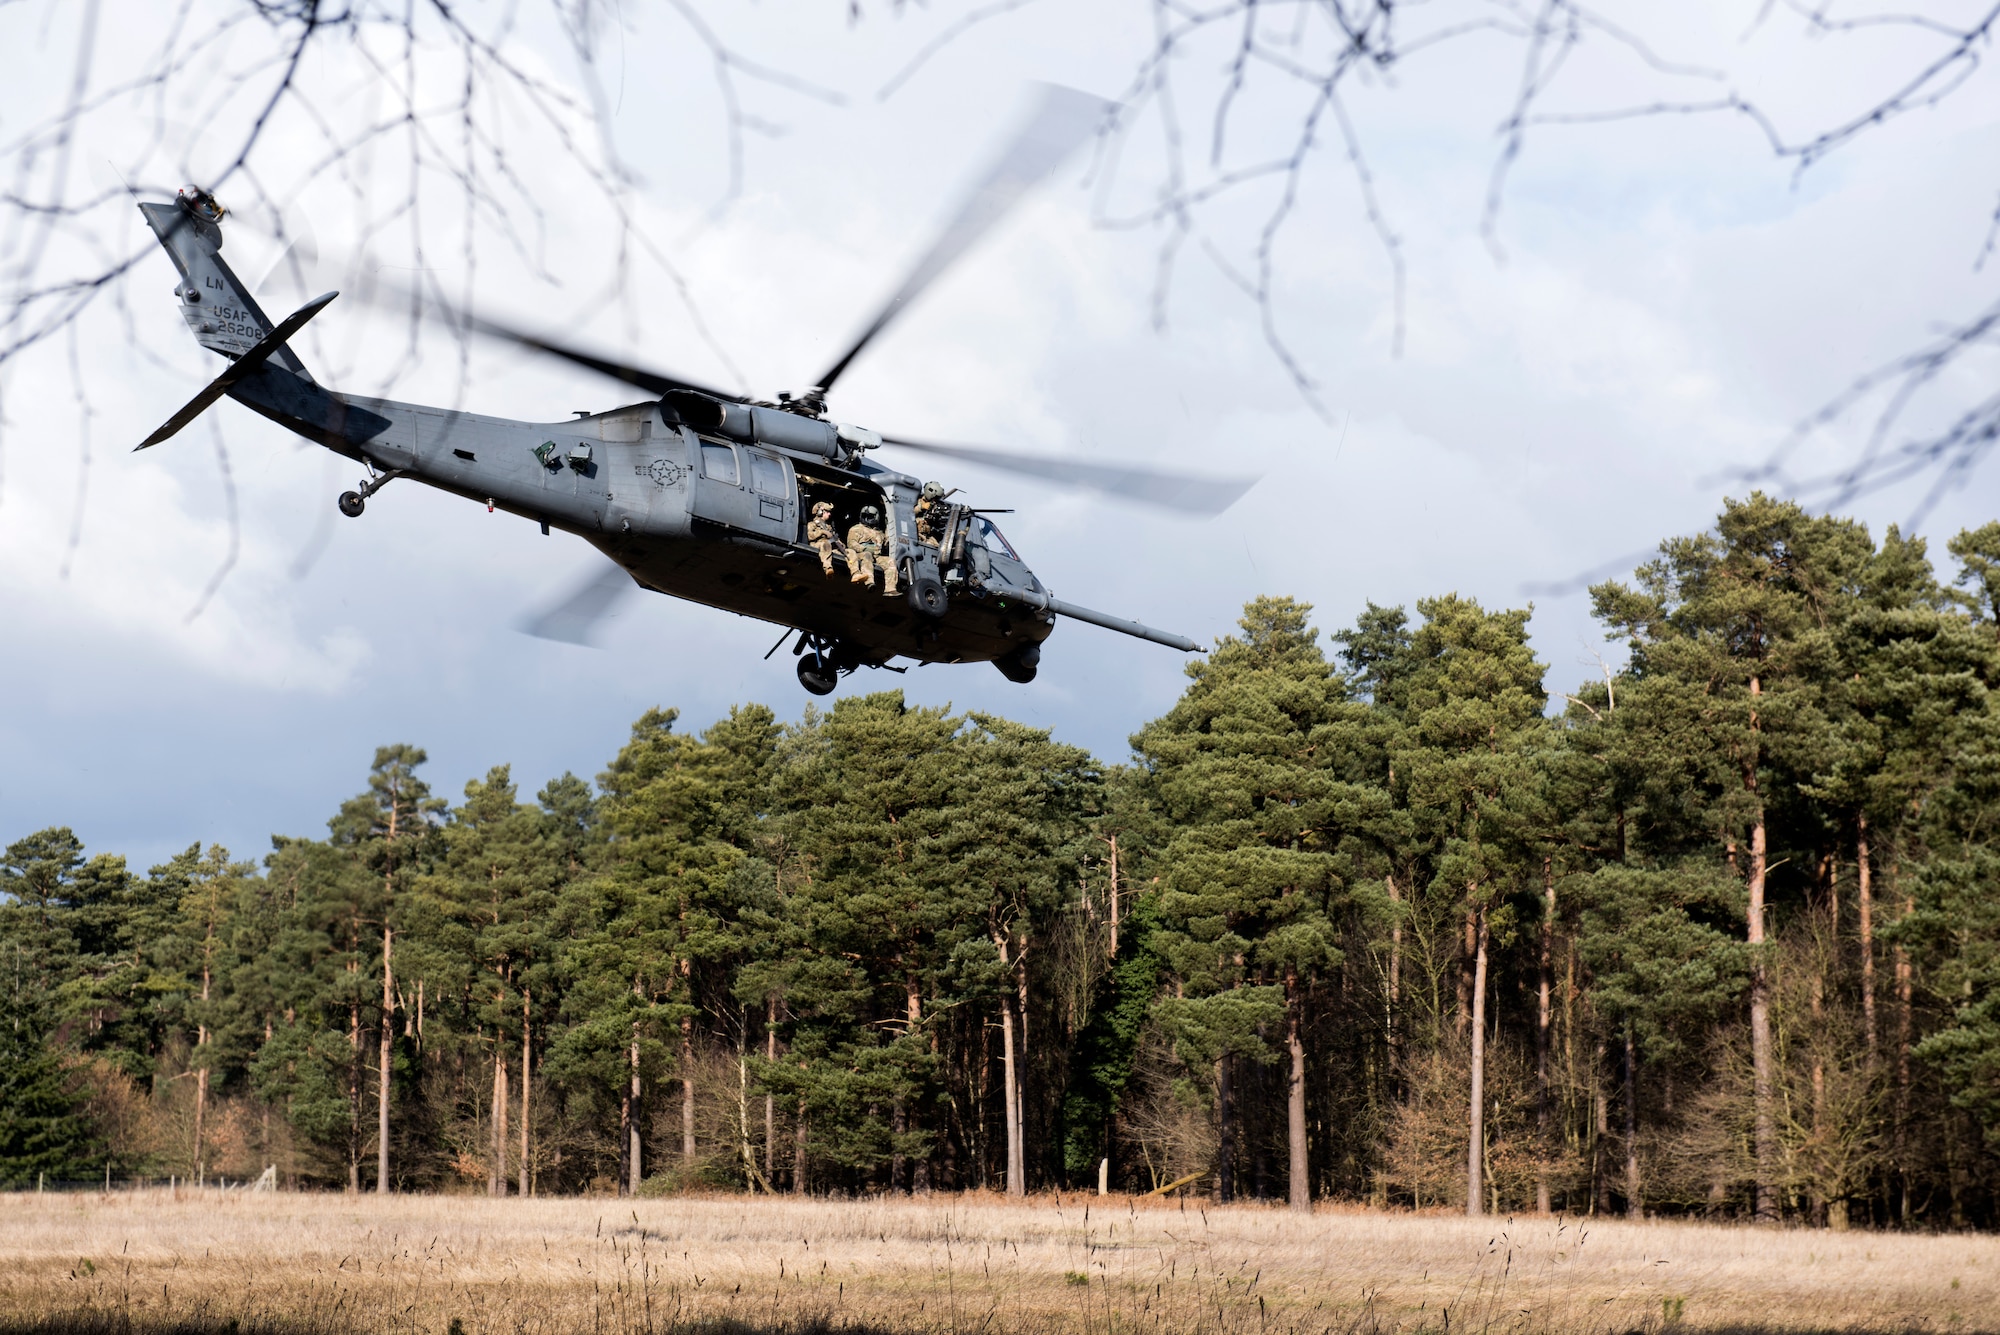 57th Rescue Squadron pararescueman depart in a 56th RQS HH-60G Pave Hawk during a training scenario for exercise Point Blank at the Stanford Training Area, England, Feb. 27. Point Blank seeks to increase coalition interoperability by providing a venue for various training opportunities in the local area. (U.S. Air Force photo/Senior Airman Malcolm Mayfield)